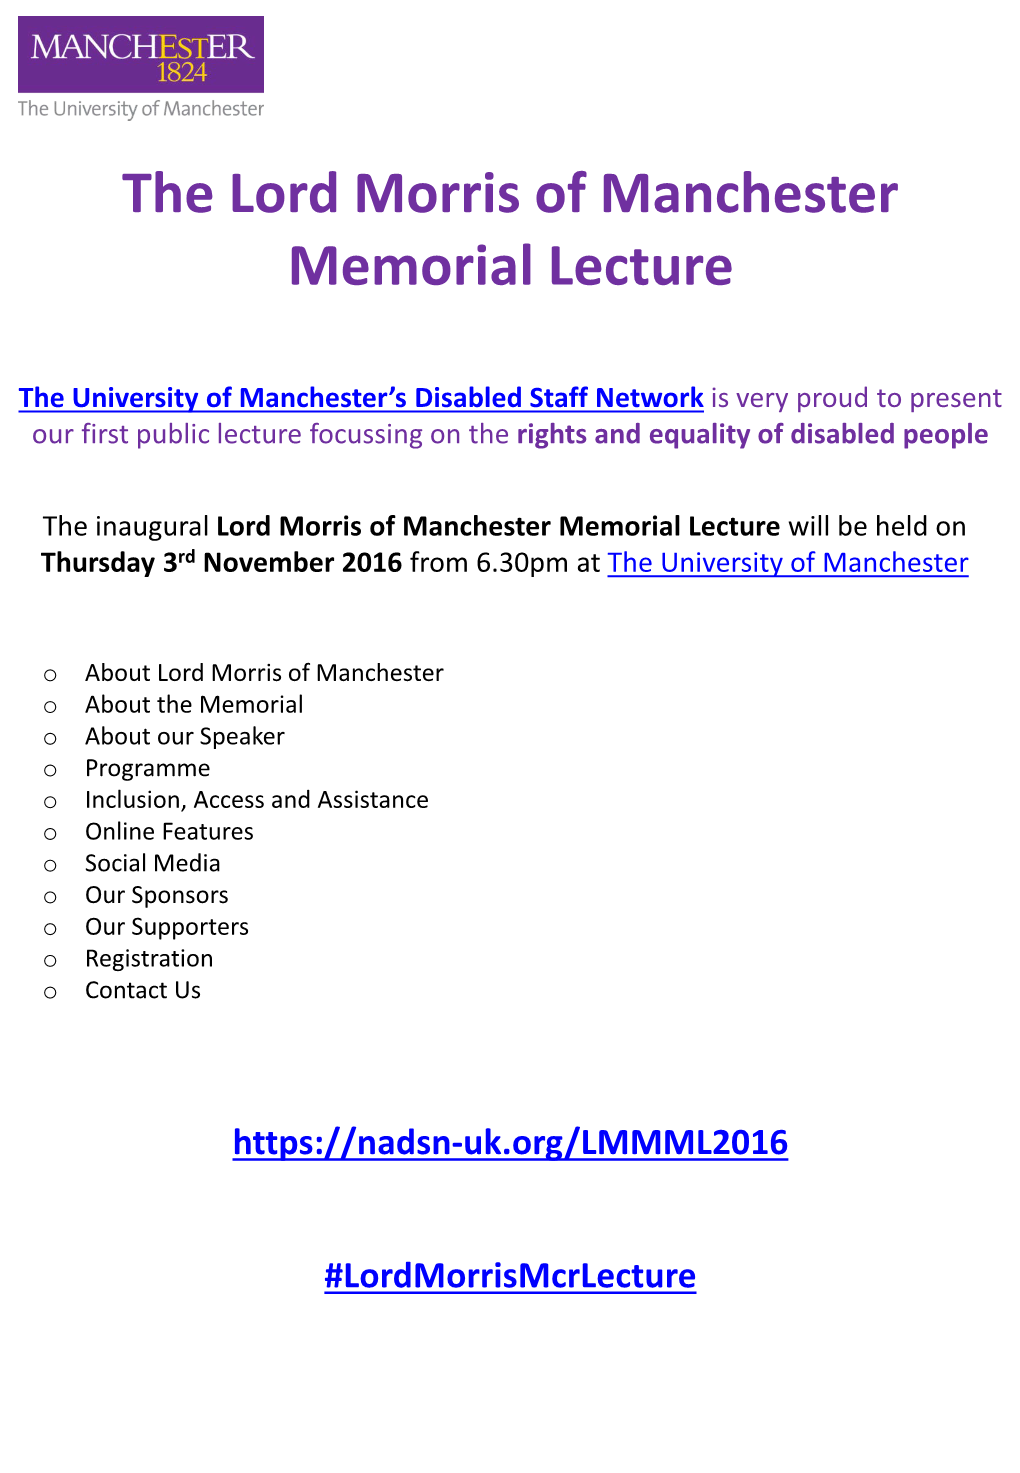 The Lord Morris of Manchester Memorial Lecture